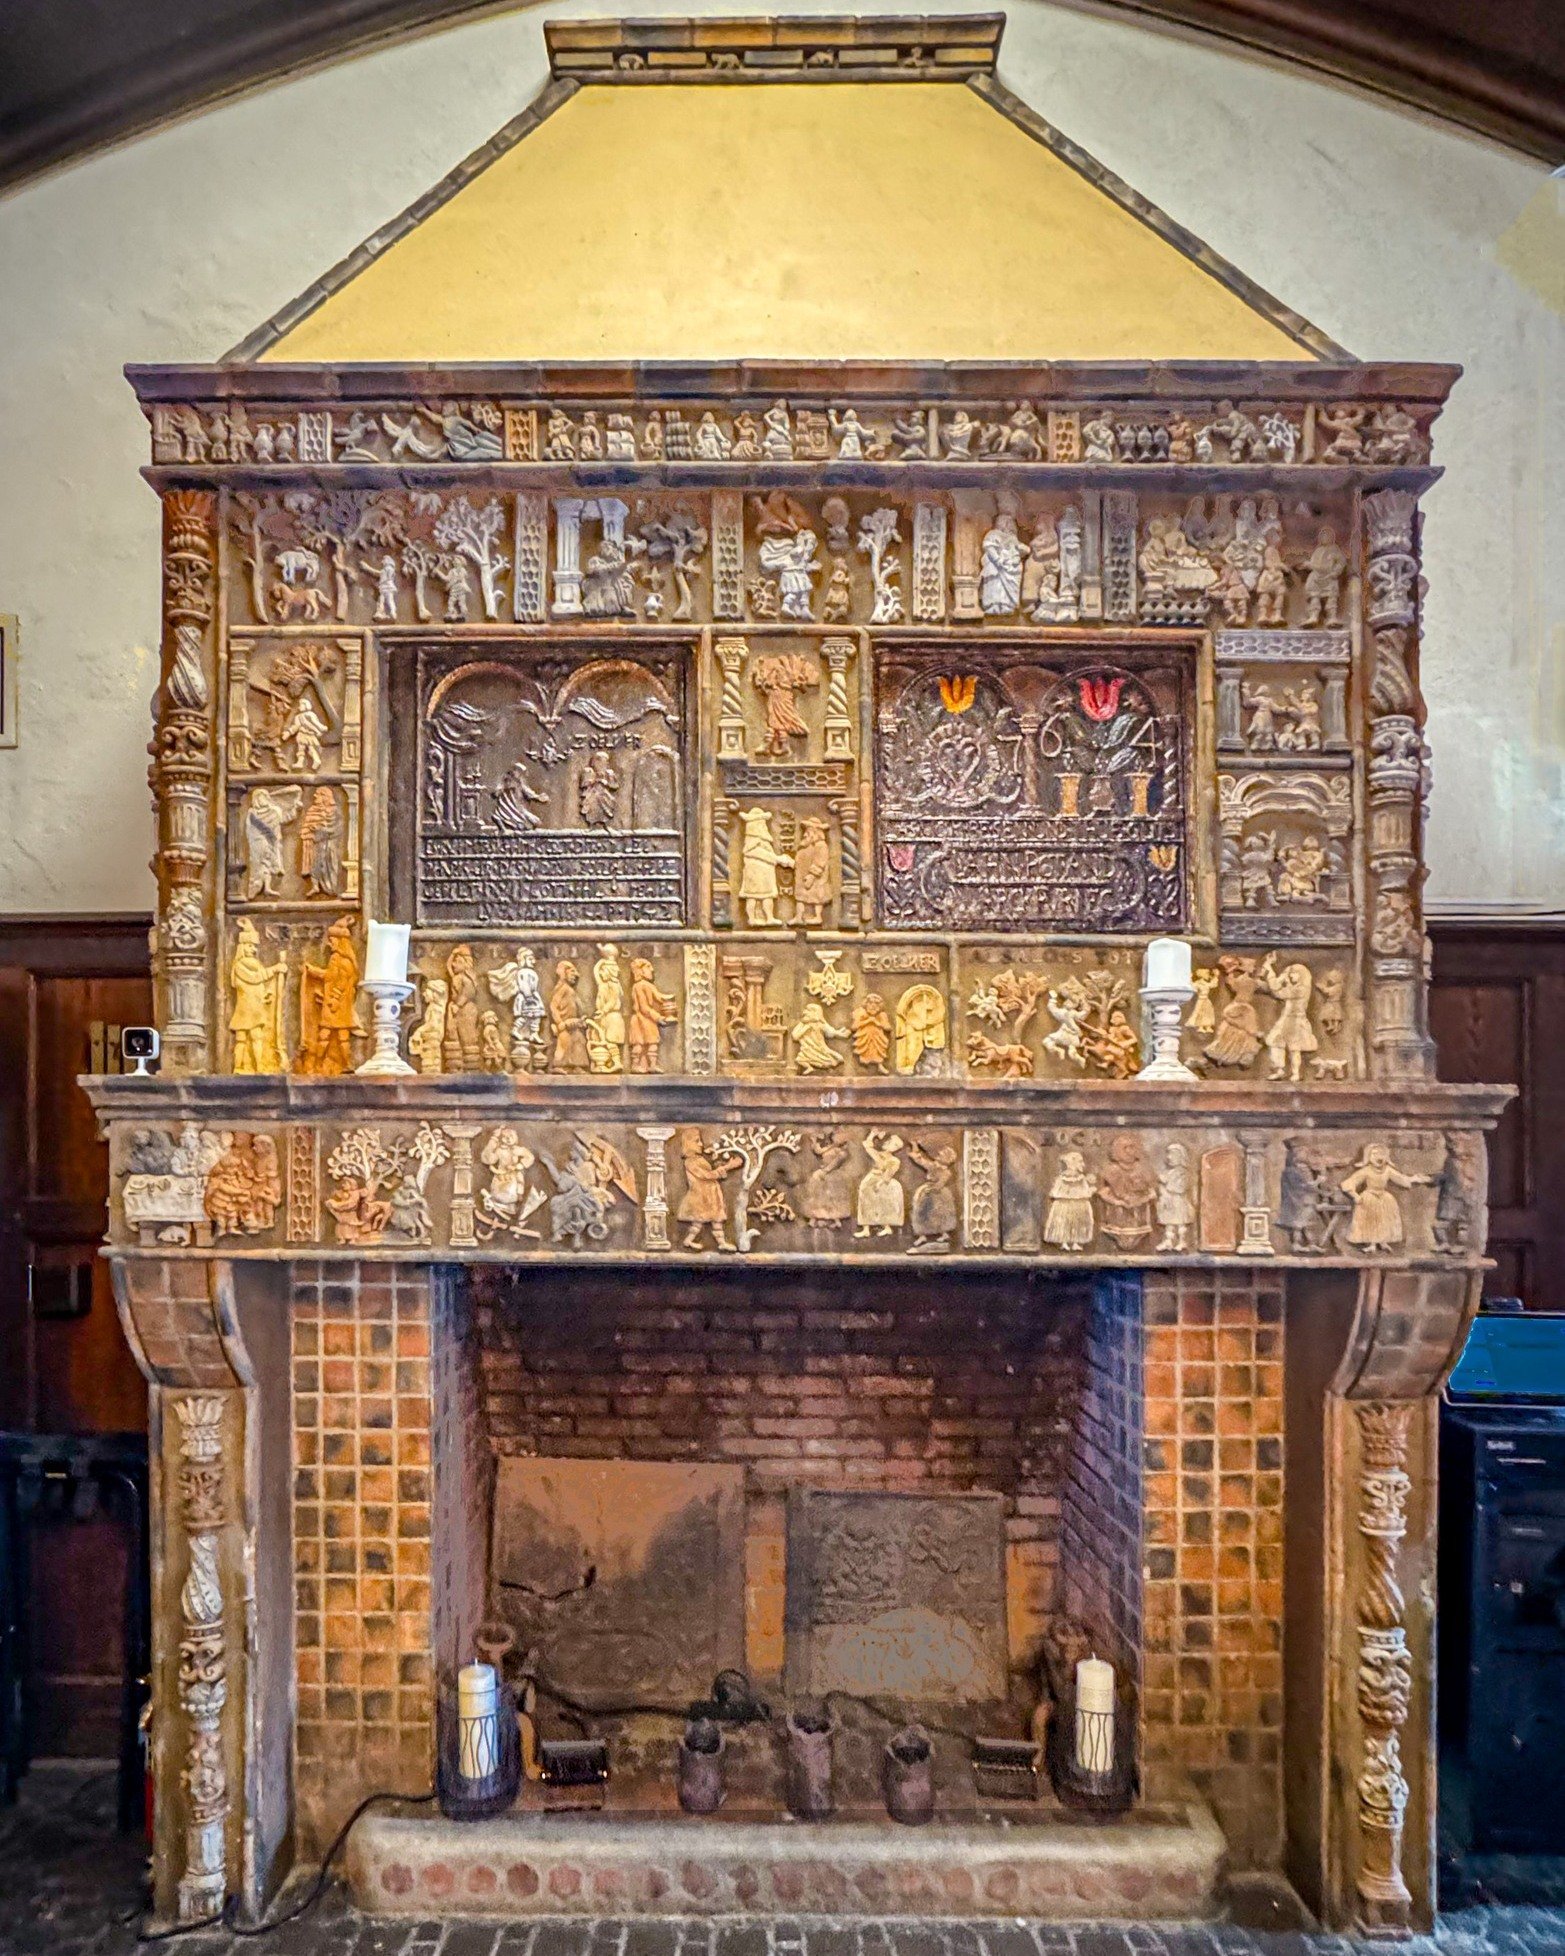 Our uniquely beautiful event venue was built in 1916 in the Tudor Revival Style.  The space is buttressed by two immense fireplaces with mantels covered in original Mercer tiles from the Moravian Pottery and Tile Works in Doylestown, Pennsylvania (on